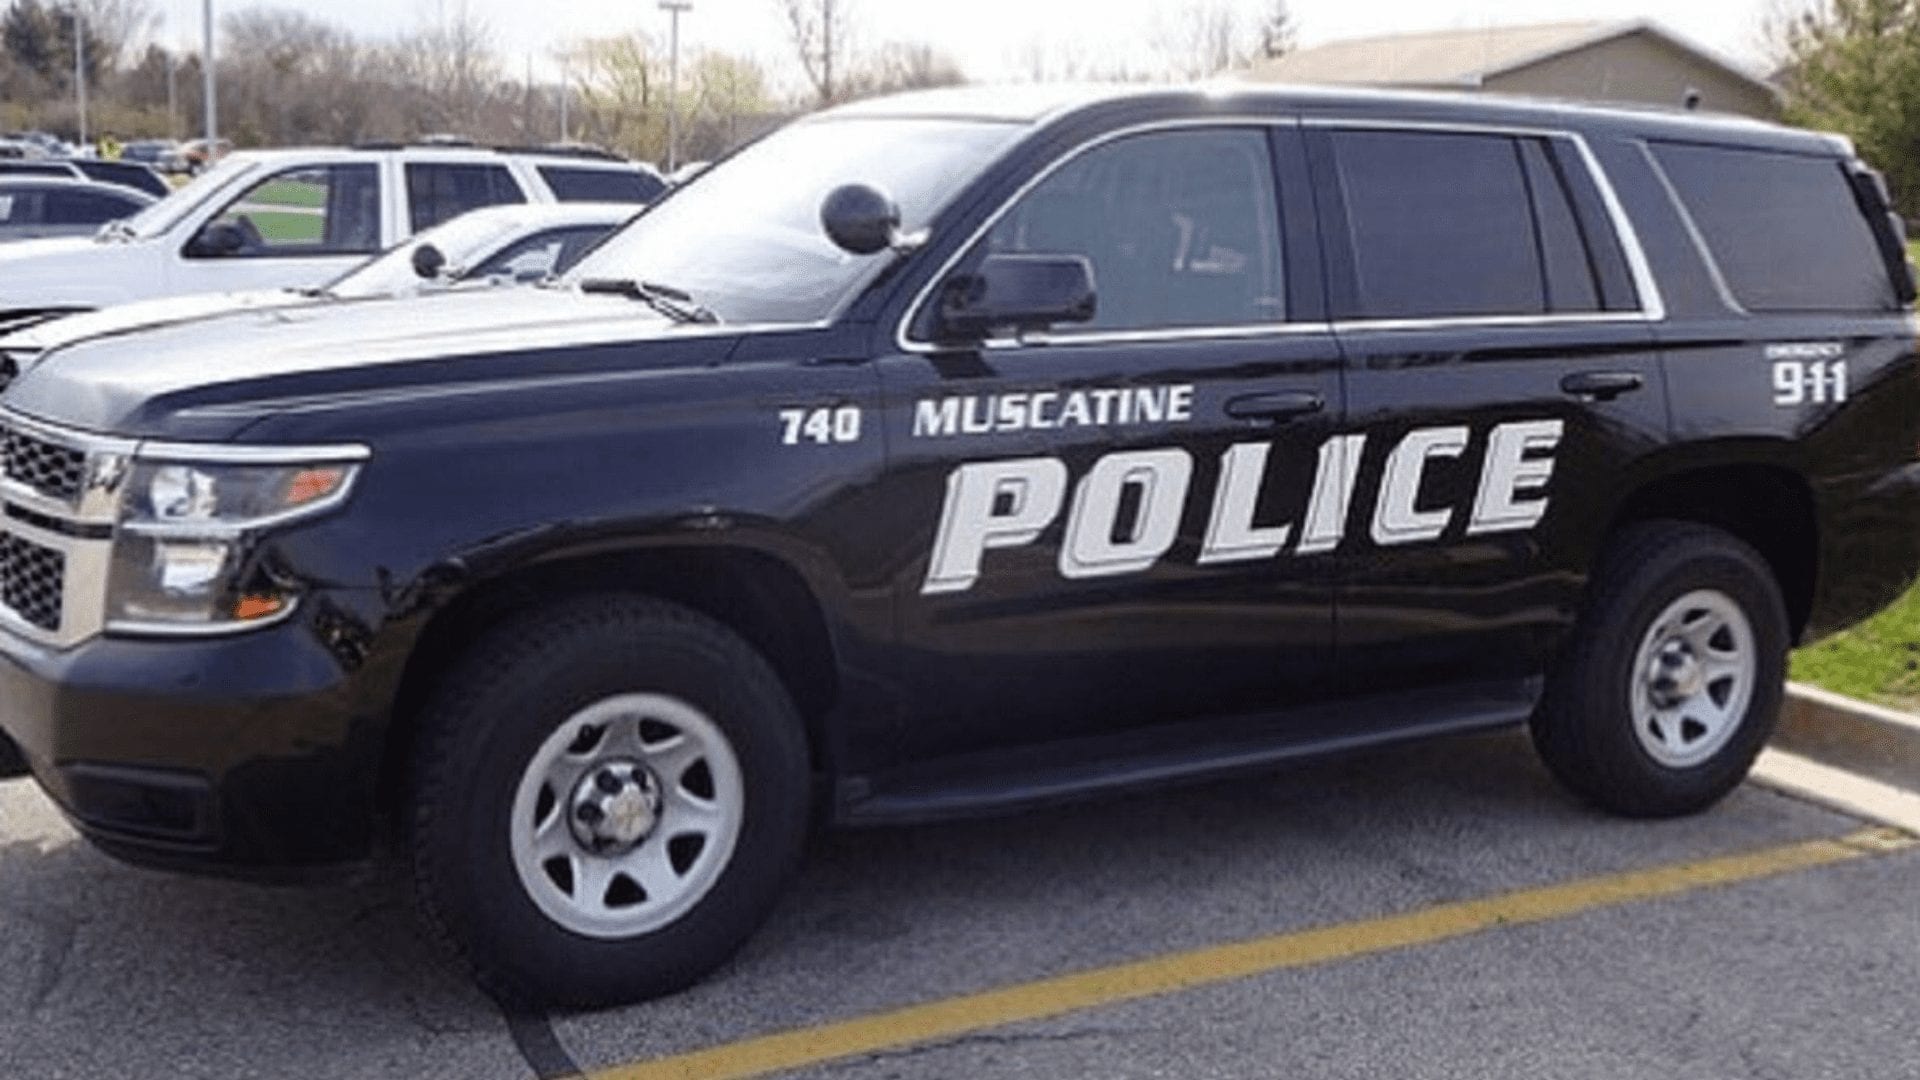 Temporary changes made at Muscatine Police Department